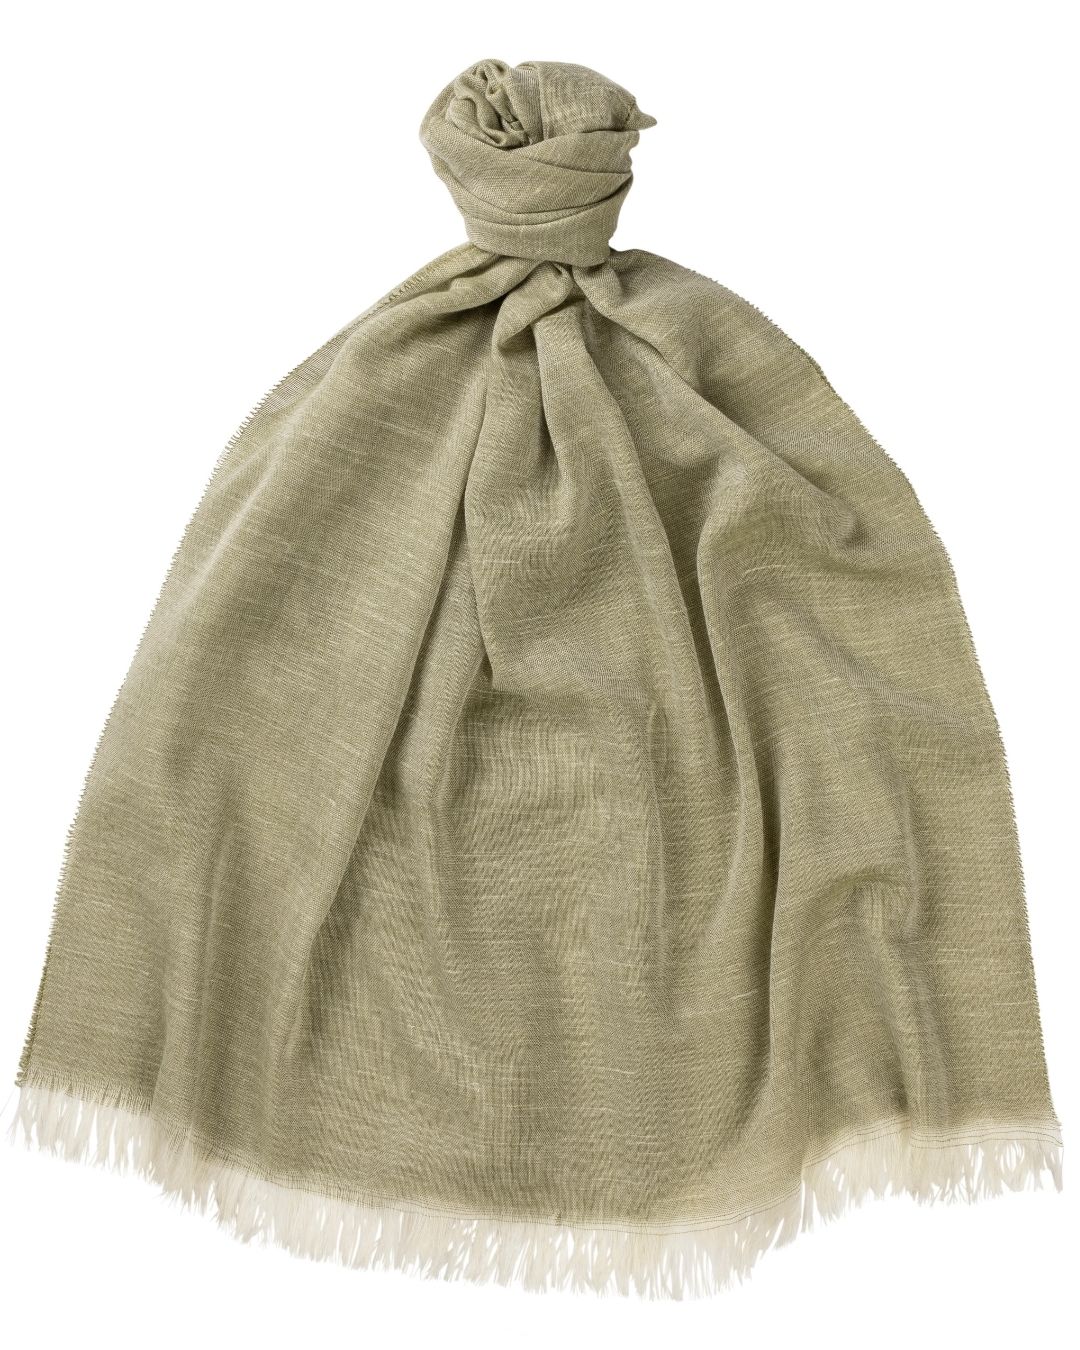 The Whitby Trans-Seasonal Cashmere Lightweight Stole